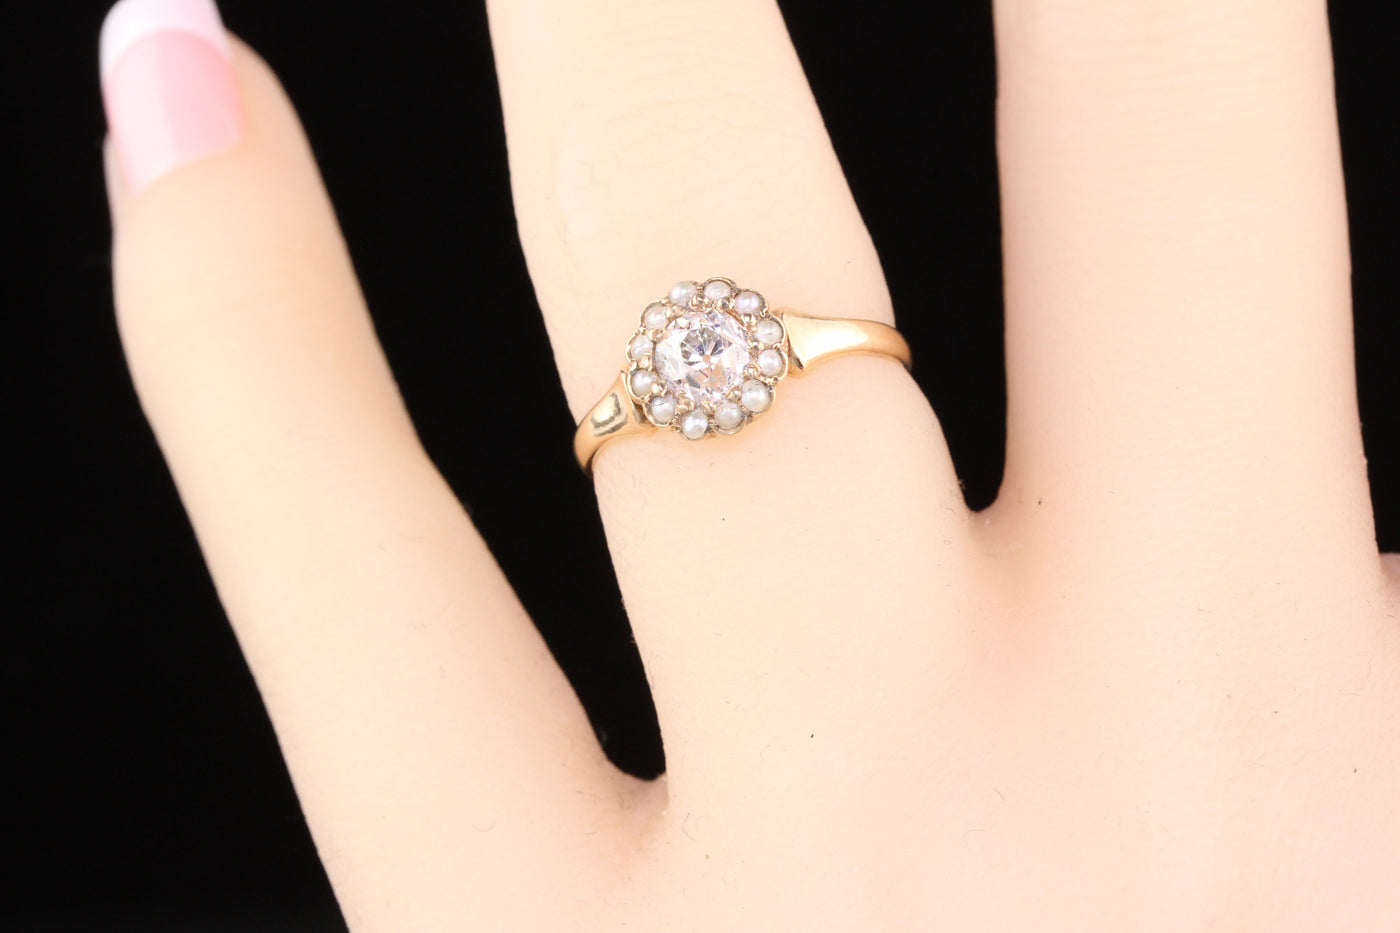 Antique Victorian 14K Rose Gold Diamond & Seed Pearl Engagement Ring - The Antique Parlour